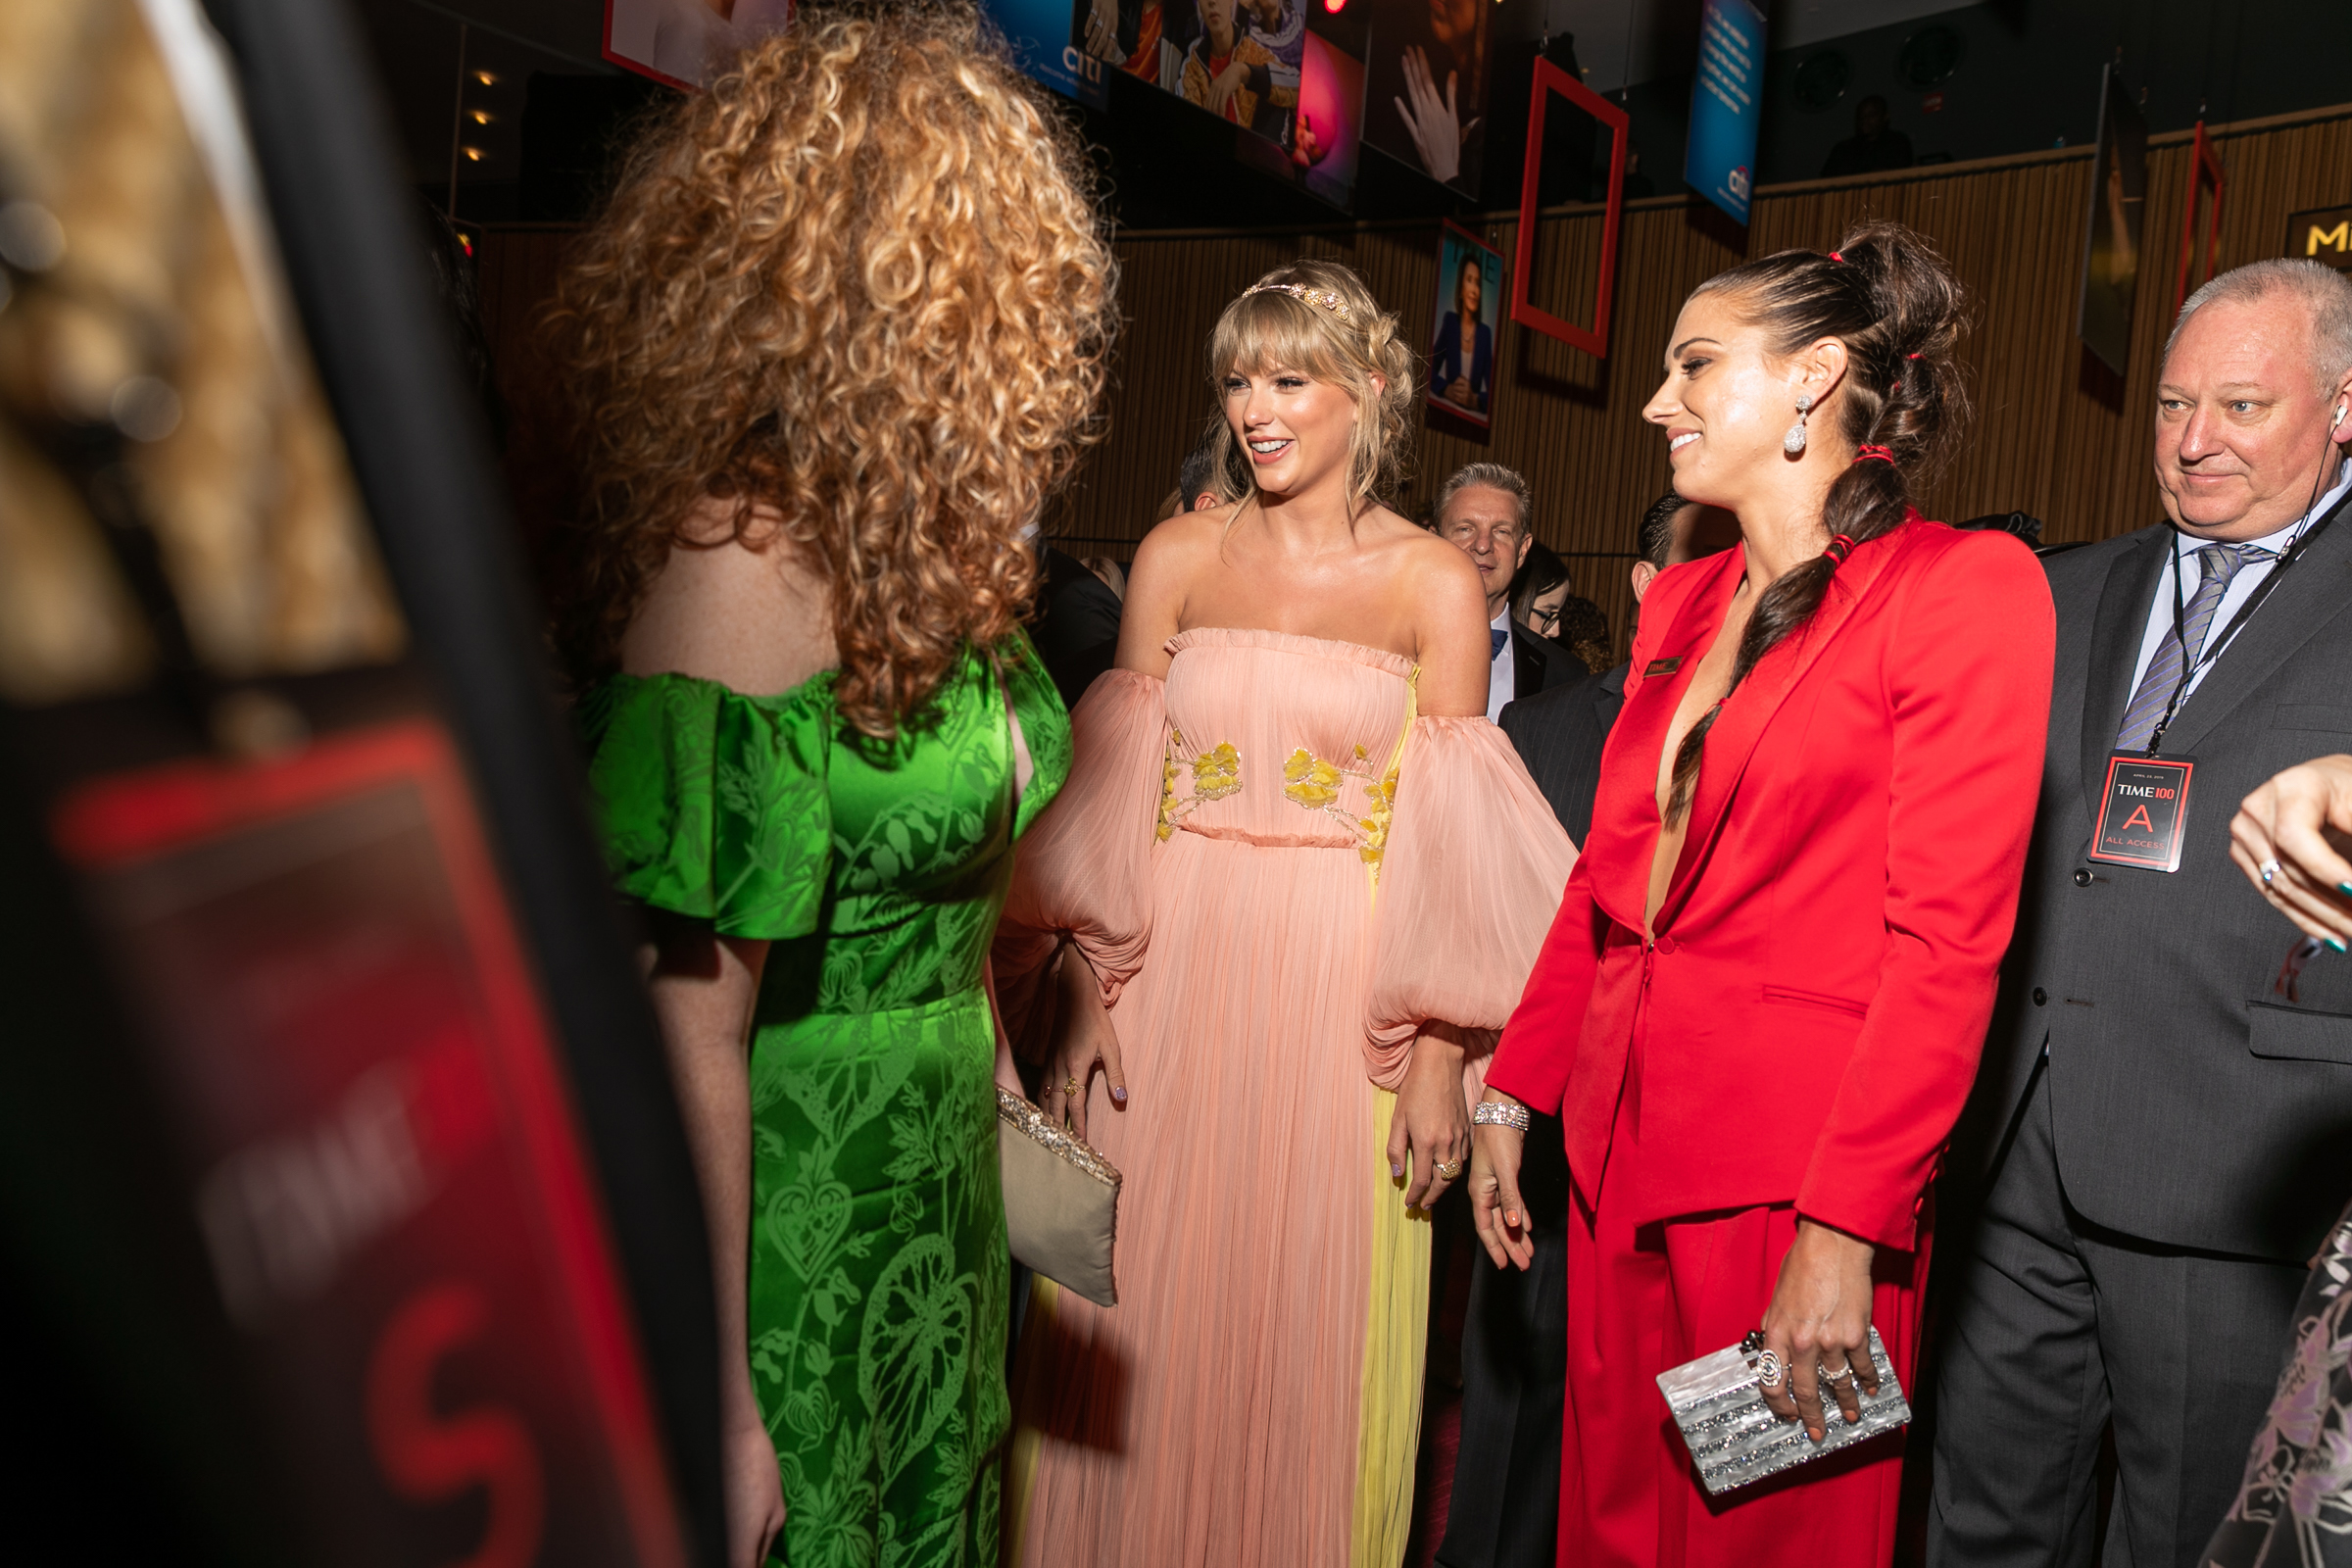 Taylor Swift and Alex Morgan at the Time 100 Gala at Jazz at Lincoln Center in New York City on April 23, 2019. (Kevin Tachman for TIME)